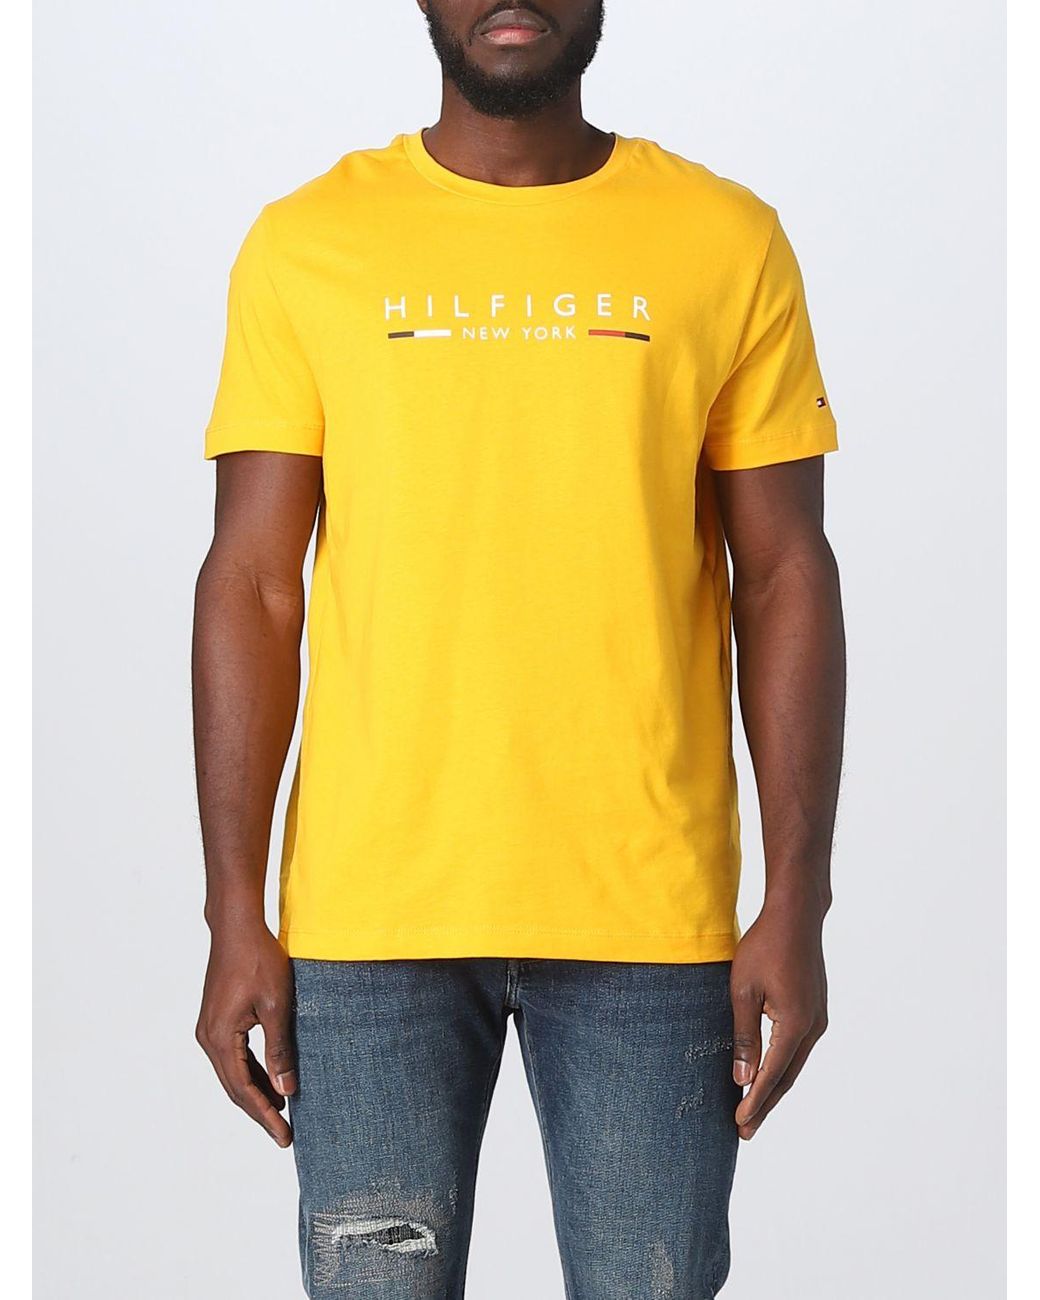 Tommy Hilfiger T-shirt in Yellow for Men | Lyst Canada